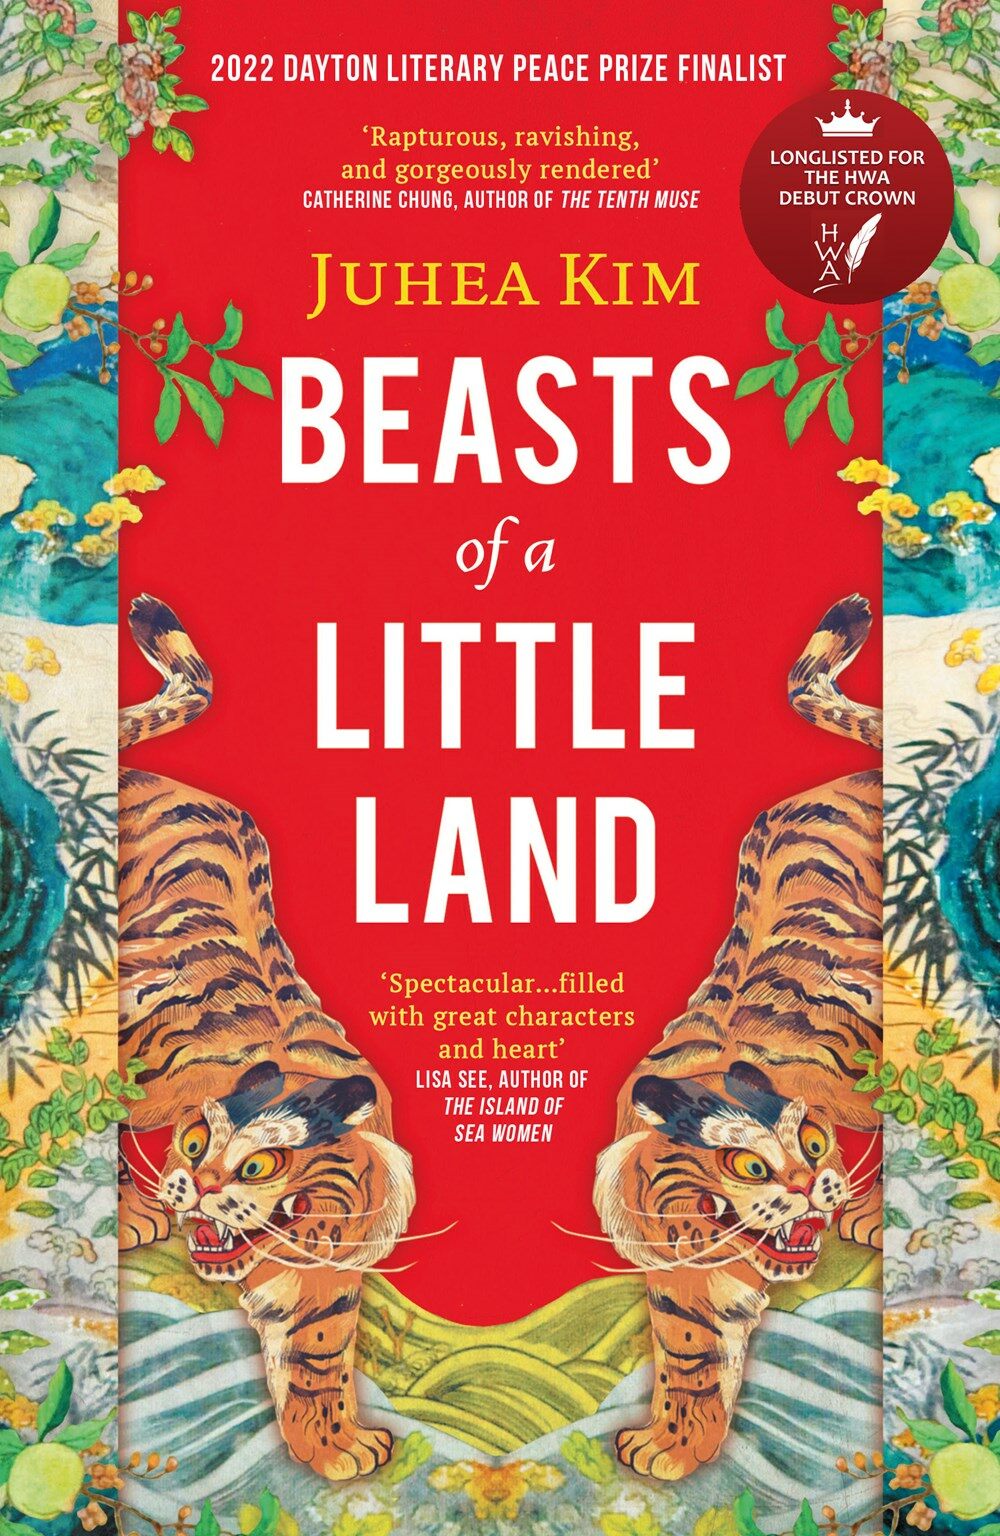 Beasts of a Little Land (Paperback)